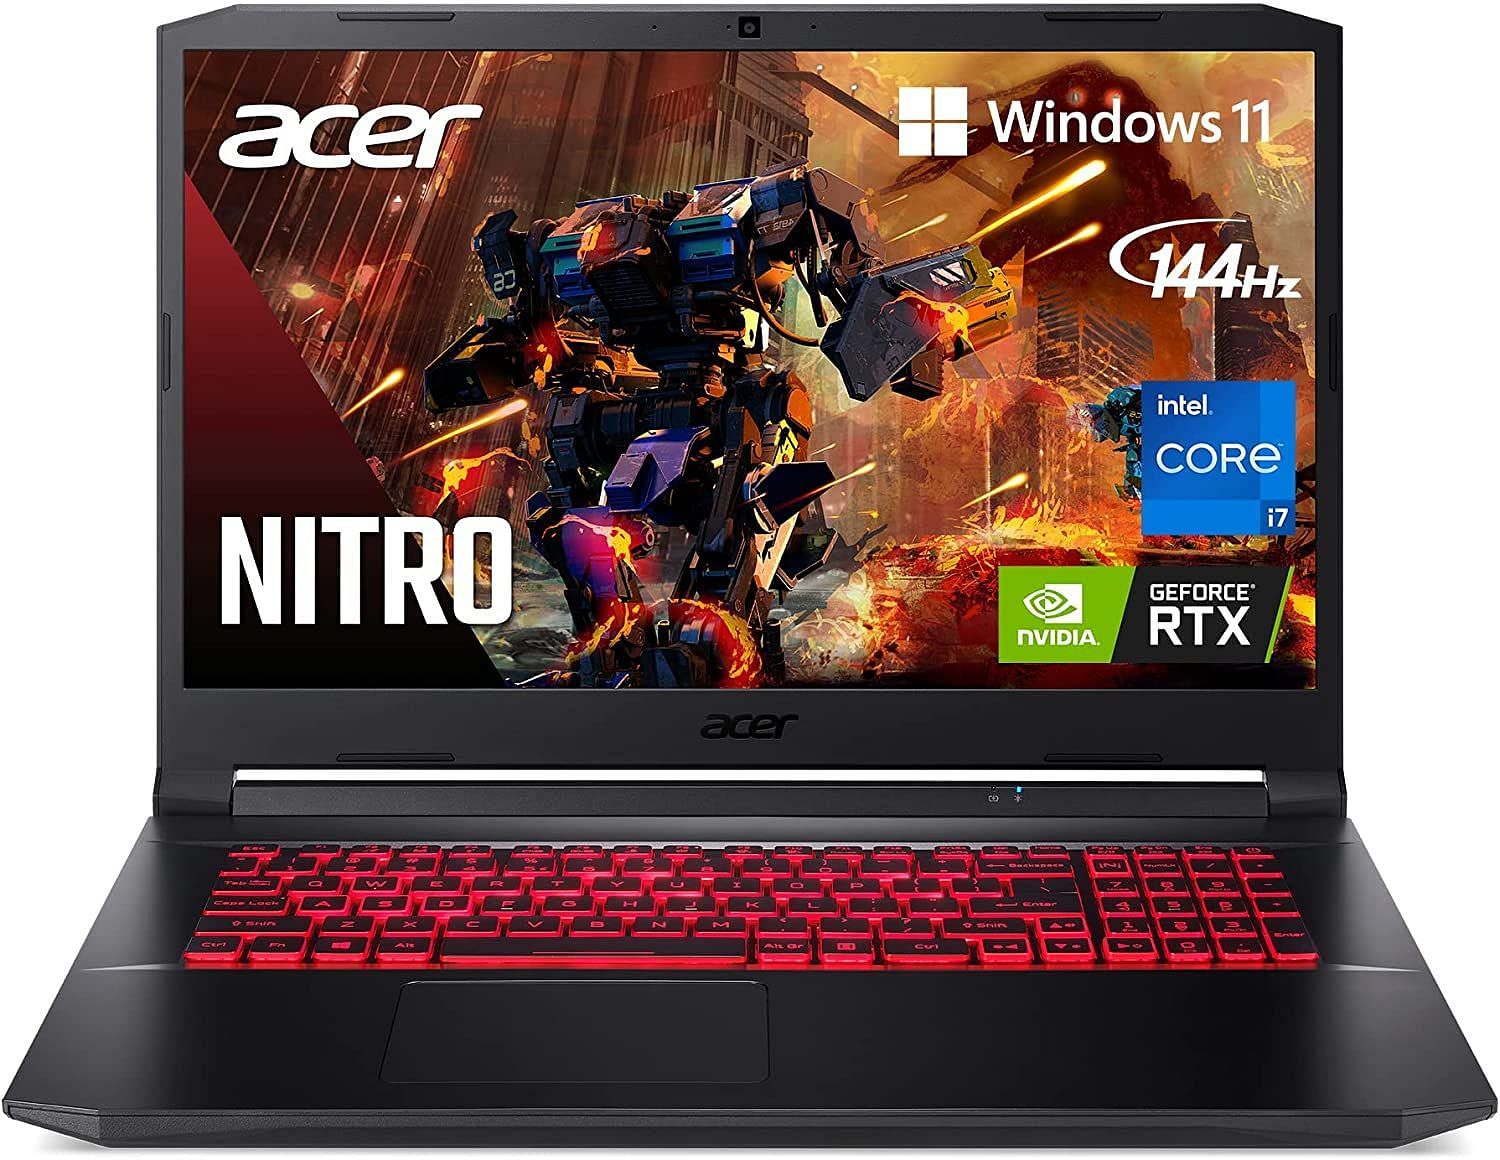 The Acer Nitro 5 AN5-17&#039;s large screen makes it easier for folks to spot loot and enemies in battle royales like Fortnite (Image via Amazon)